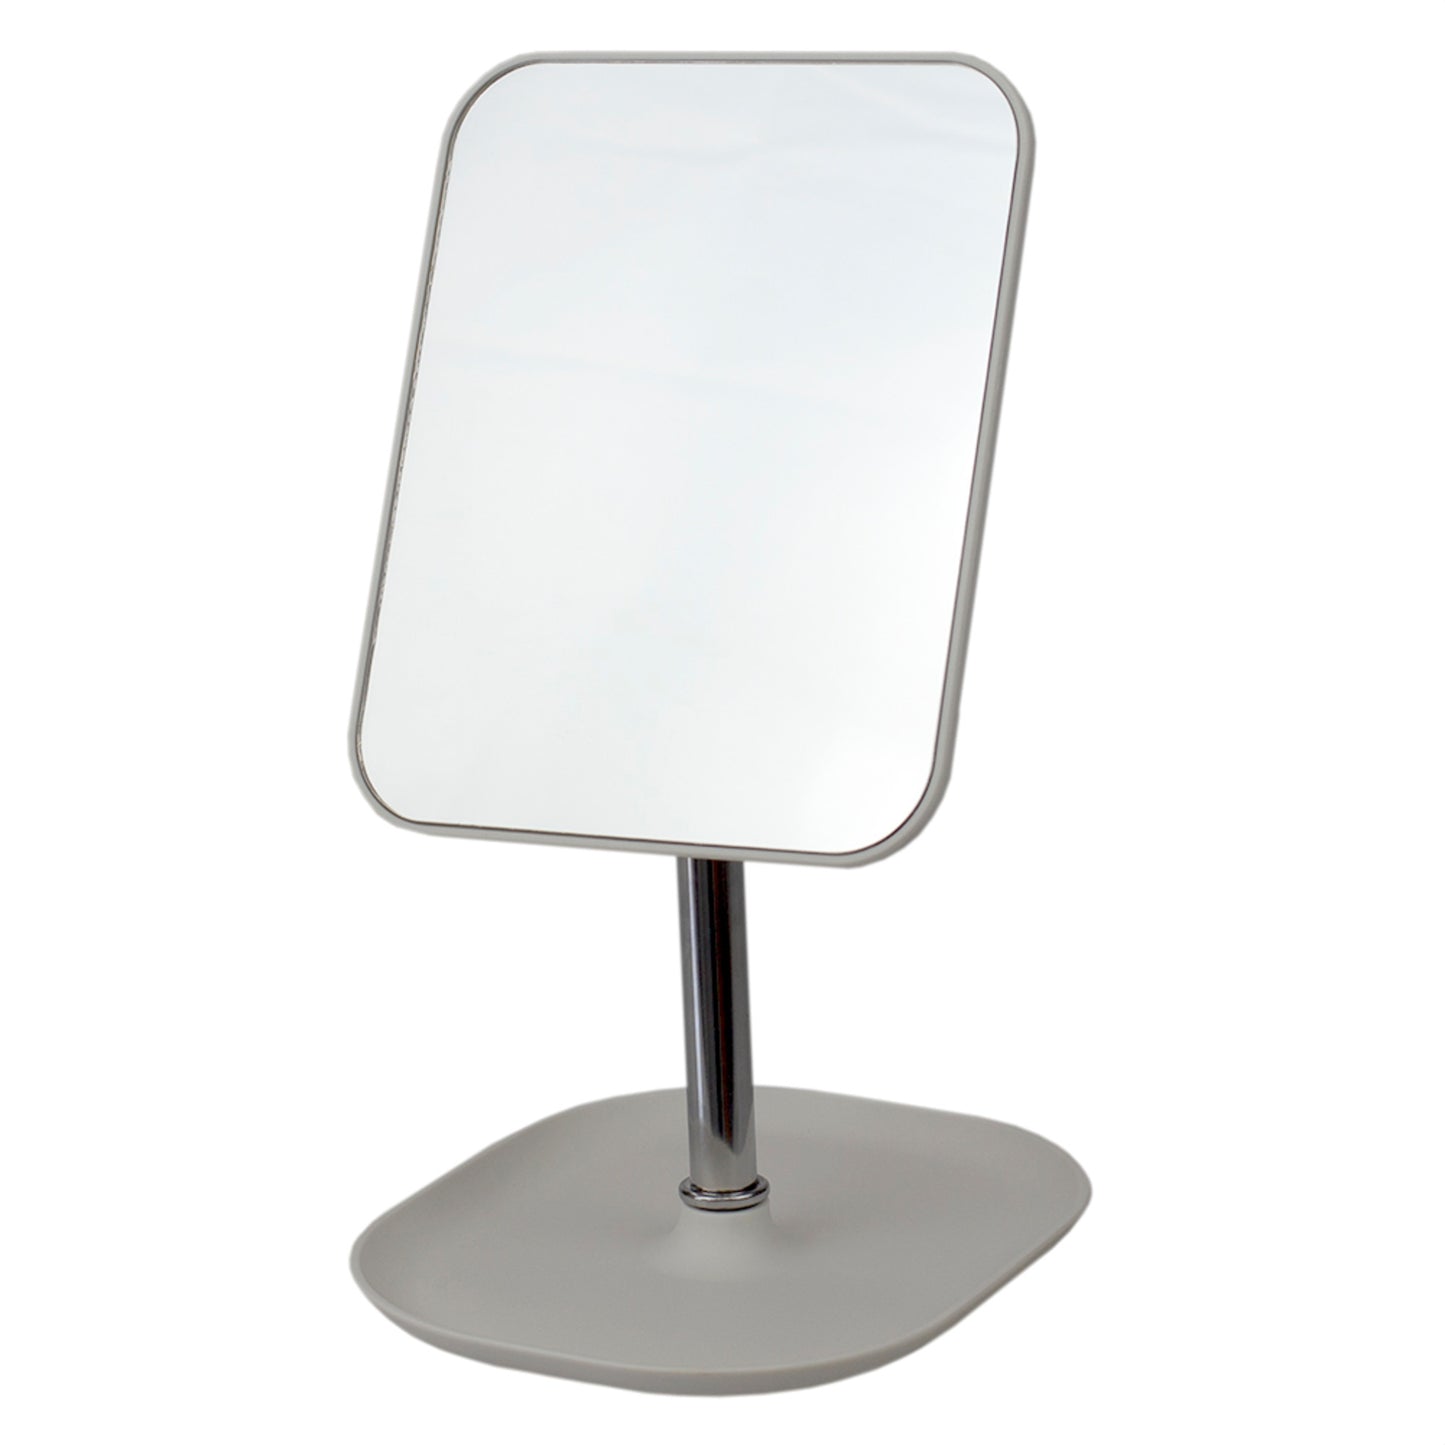 Home Basics Modern & Contemporary Double Sided Adjustable Smooth Swivel Square Makeup Mirror with Plastic Frame and Tray Base, Ivory - Ivory